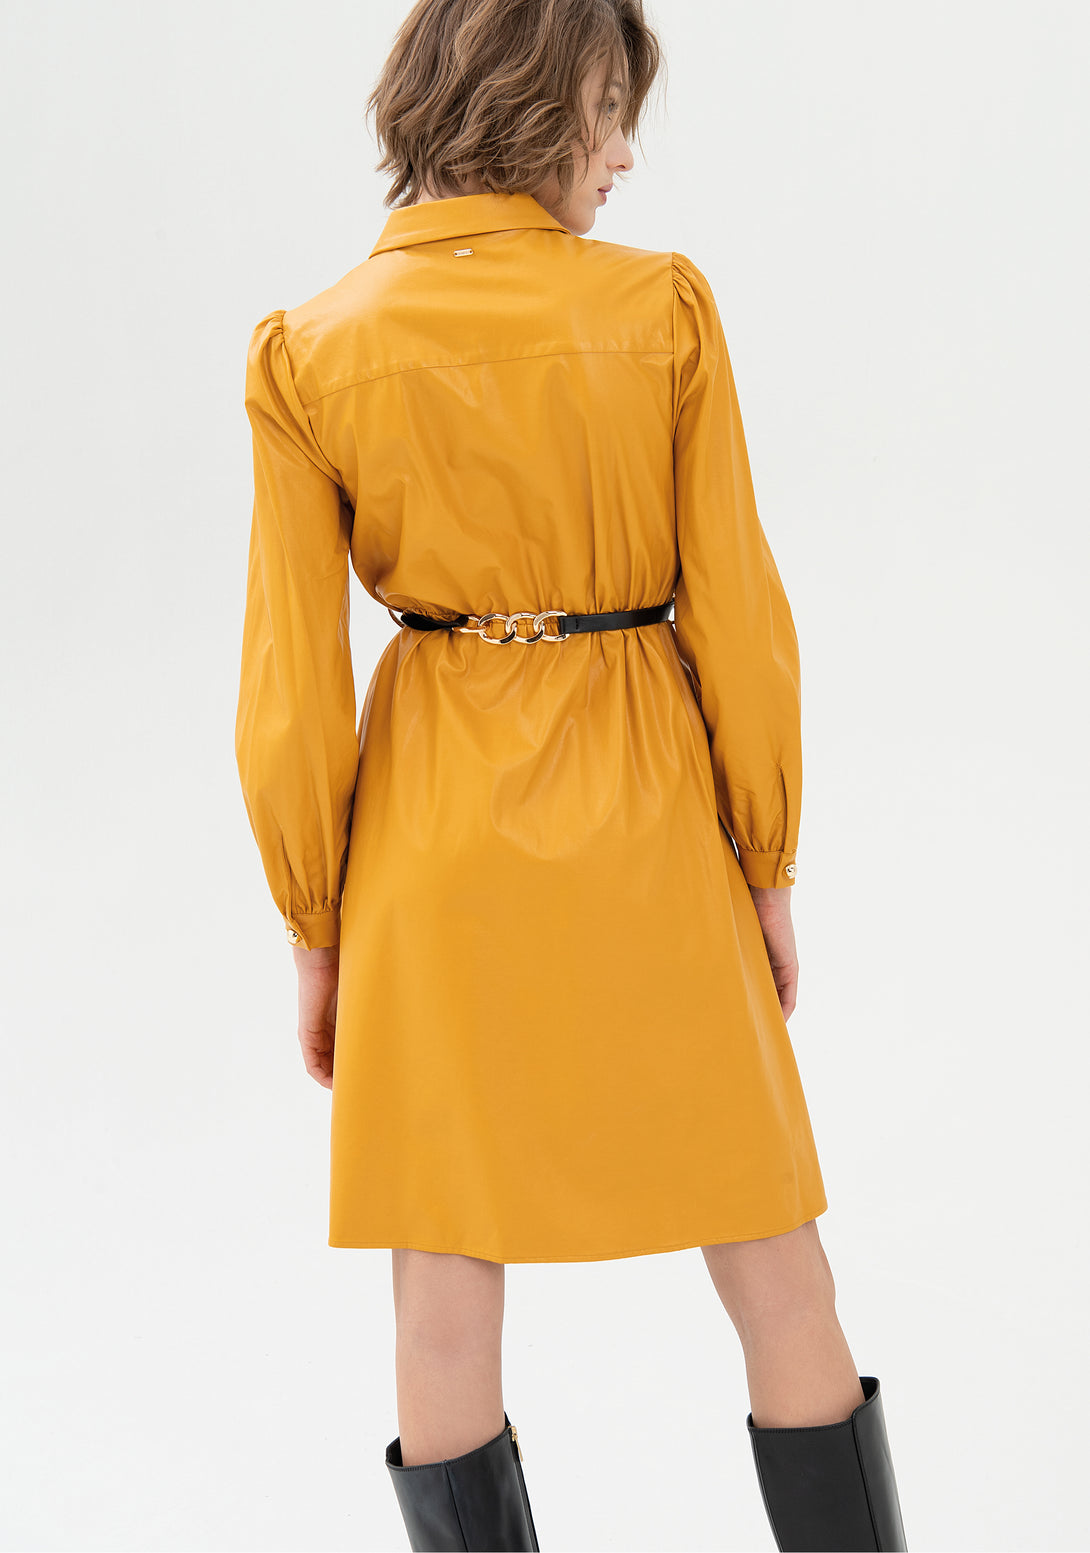 Chemisier dress regular fit middle length made in eco leather